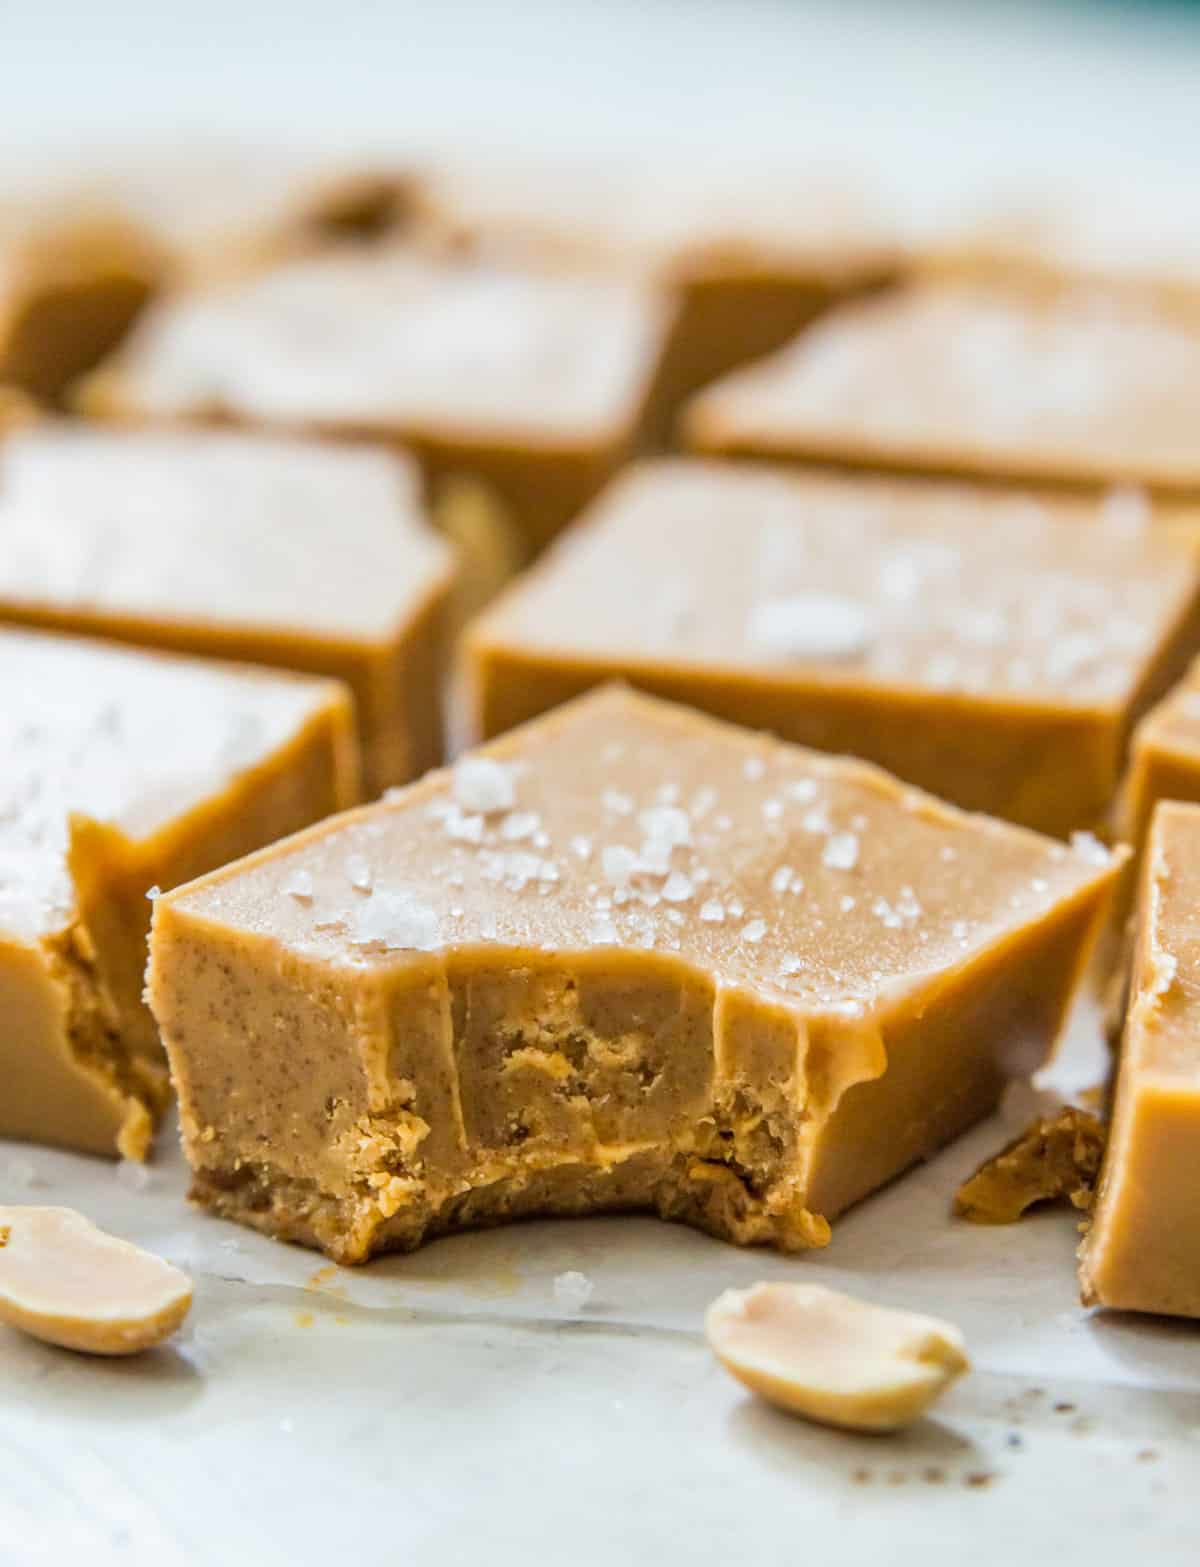 A piece of no bake peanut butter fudge with a bite out of it.